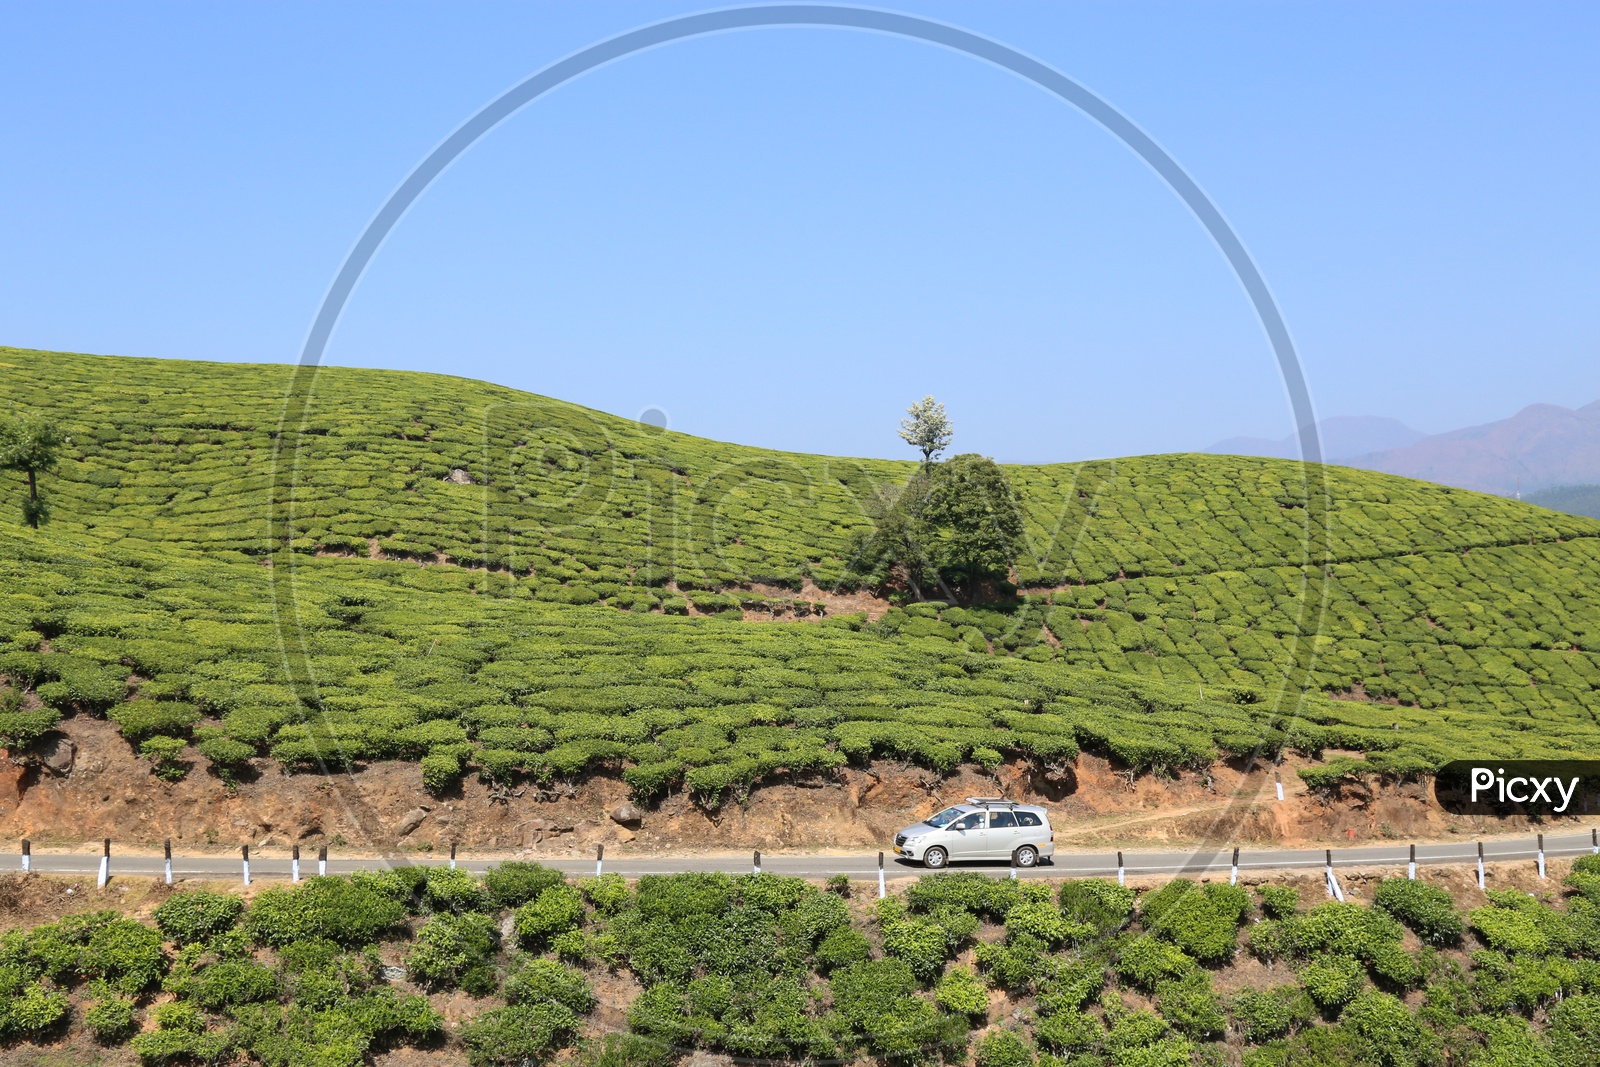 Roads In munnar with Tea Plantations On Both Sides Of Roads